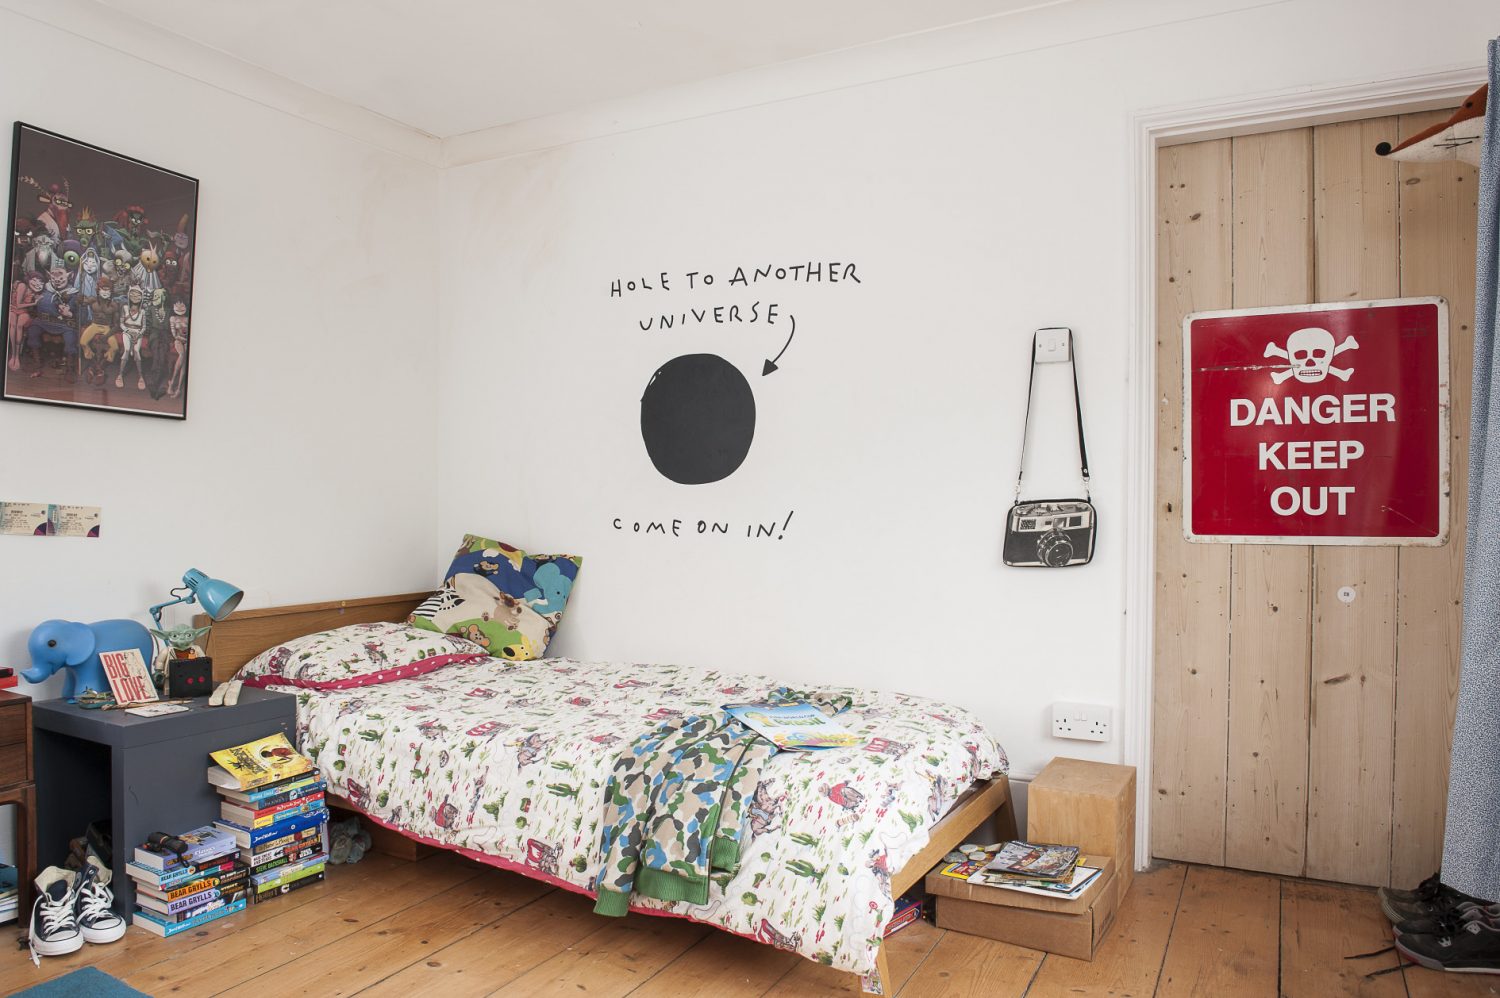 Zack and Aggy let their creativity run wild in their playfully styled bedrooms